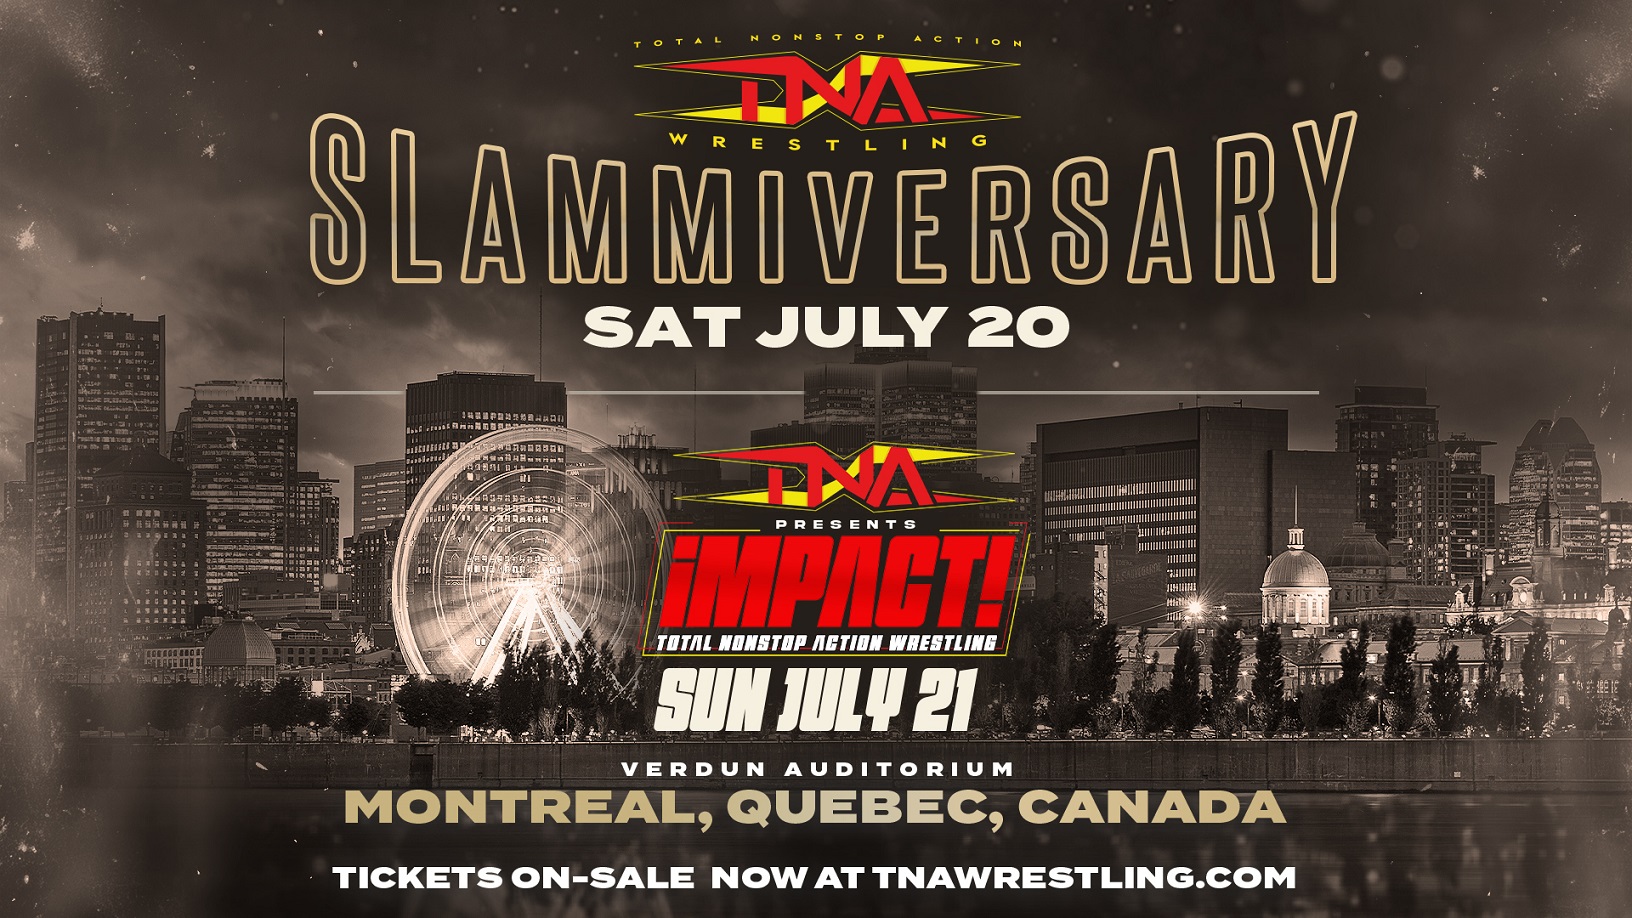 Additional Seats Now Available For Both TNA Wrestling Shows In Montreal, July 20-21 – TNA Wrestling